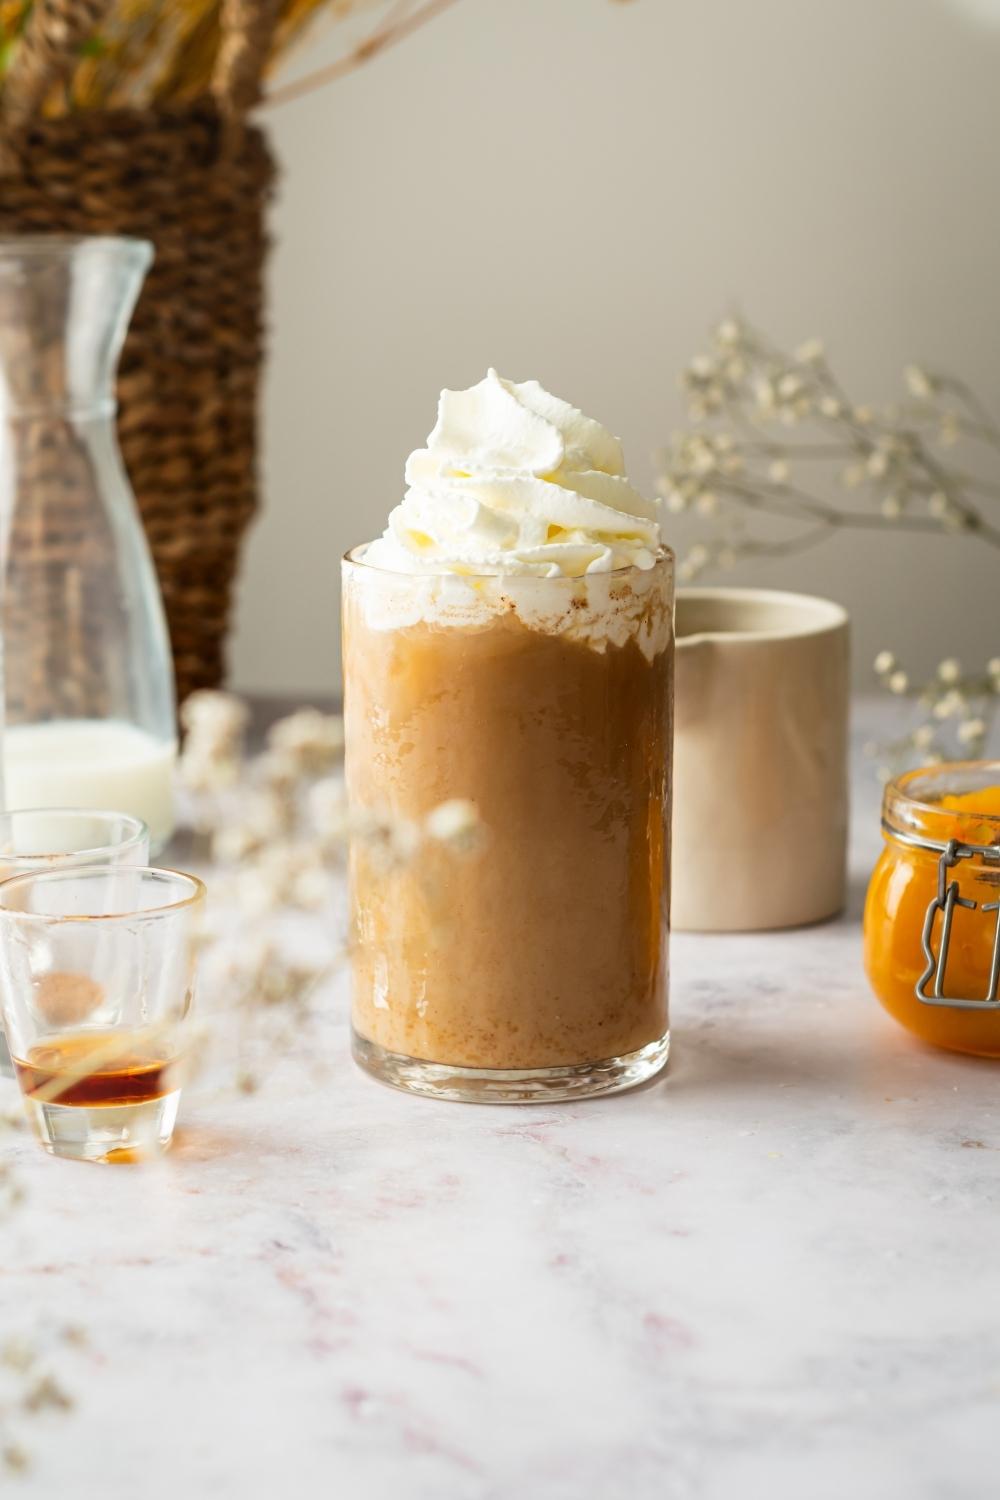 Pumpkin cream cold brew with whipped cream on top in a glass.